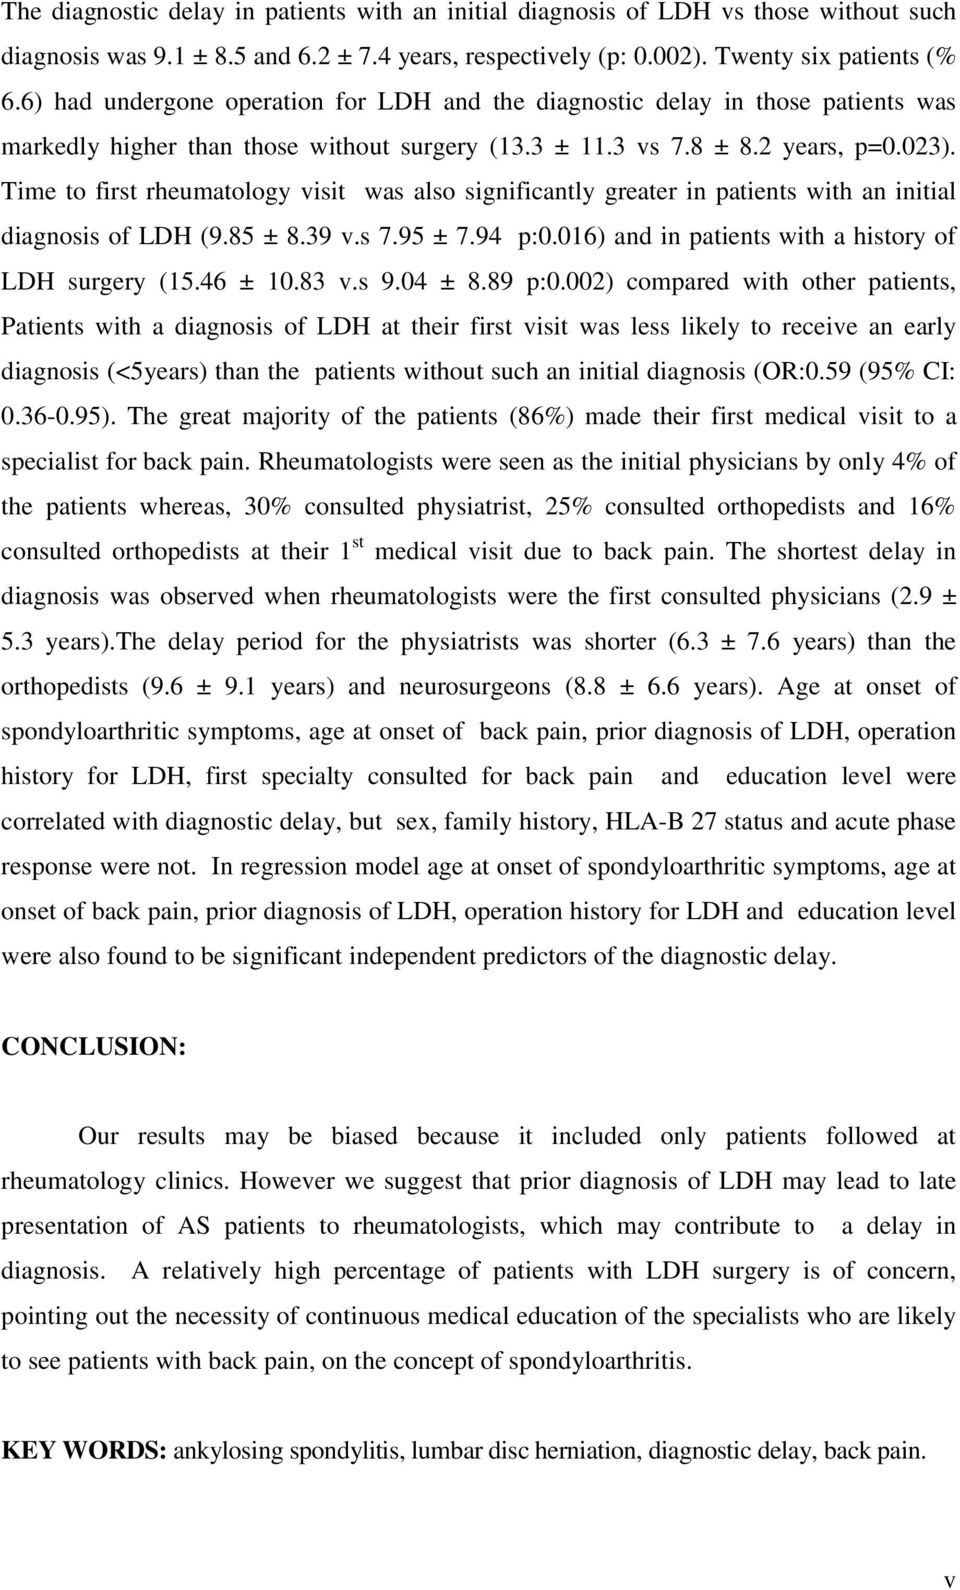 Time to first rheumatology visit was also significantly greater in patients with an initial diagnosis of LDH (9.85 ± 8.39 v.s 7.95 ± 7.94 p:0.016) and in patients with a history of LDH surgery (15.